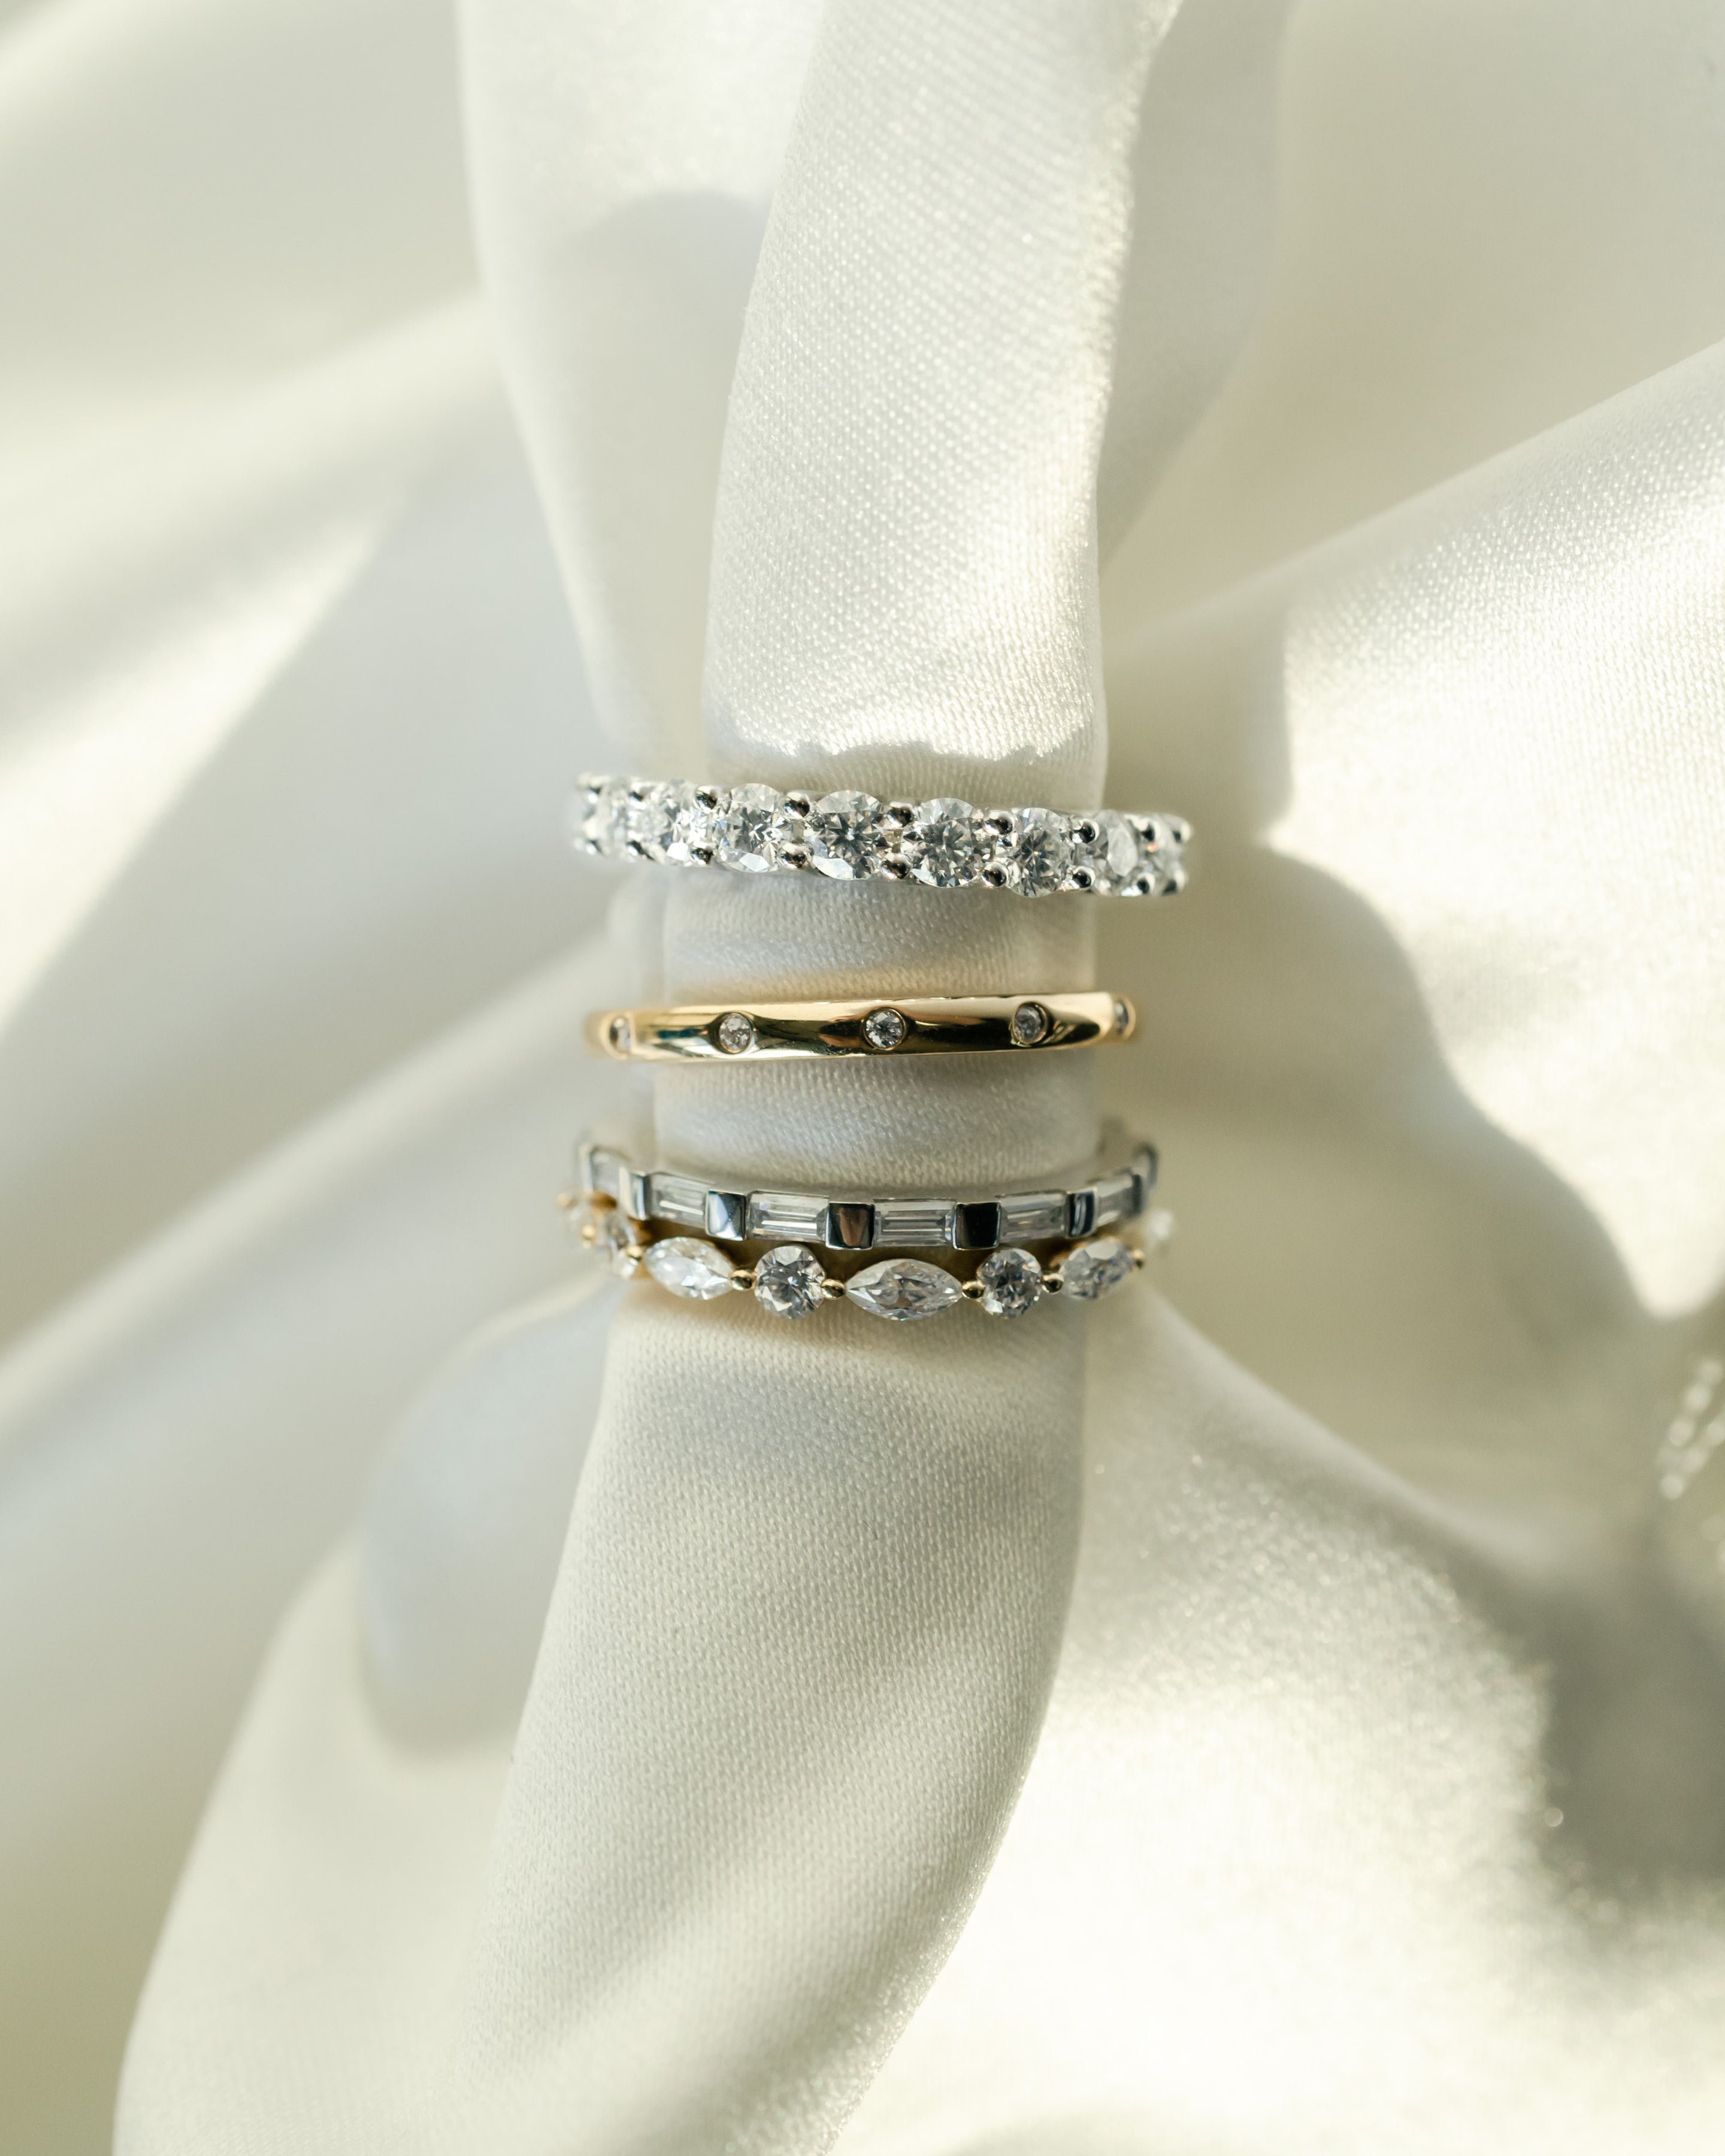 Wedding Ring Guide: How to choose the perfect ring